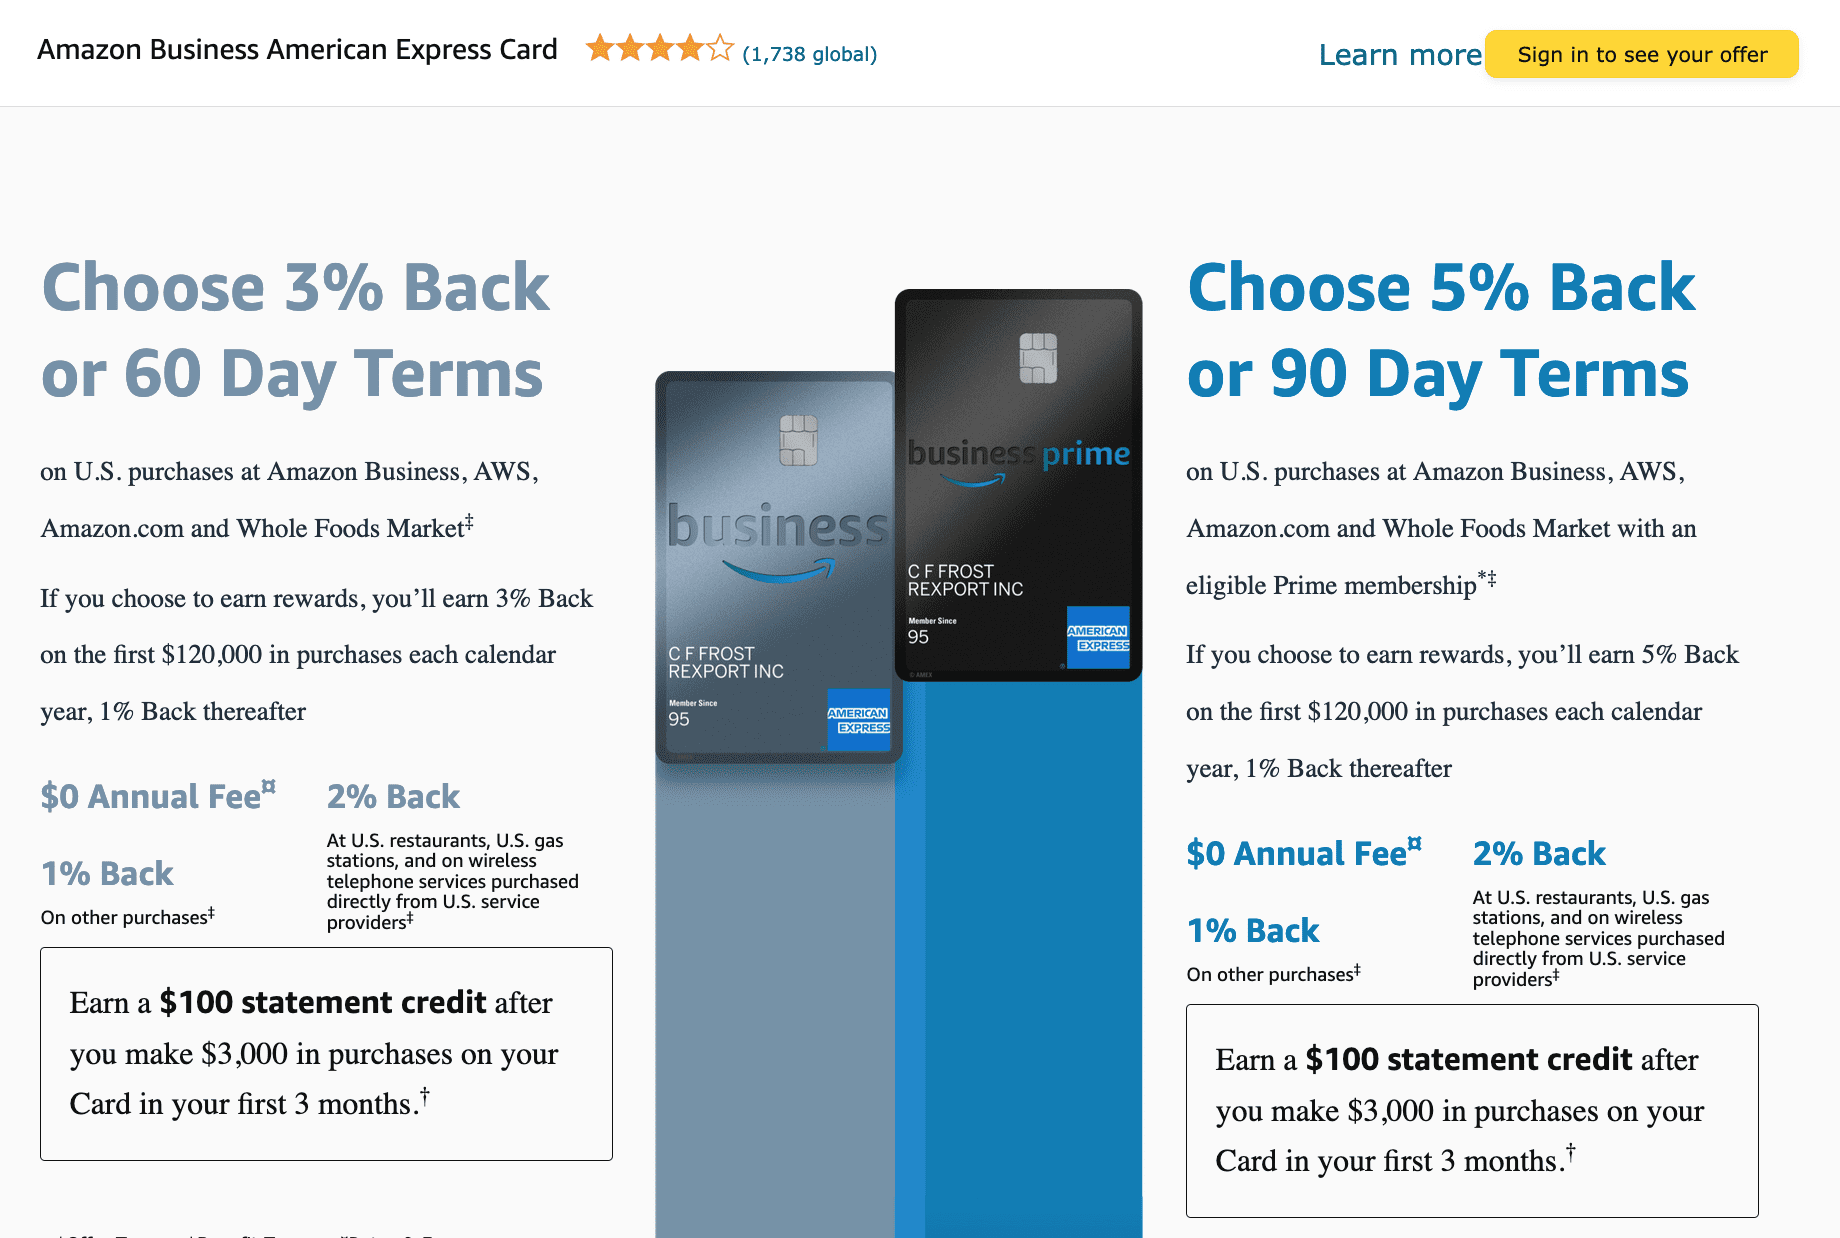 Co-marketing example from Amazon and American Express